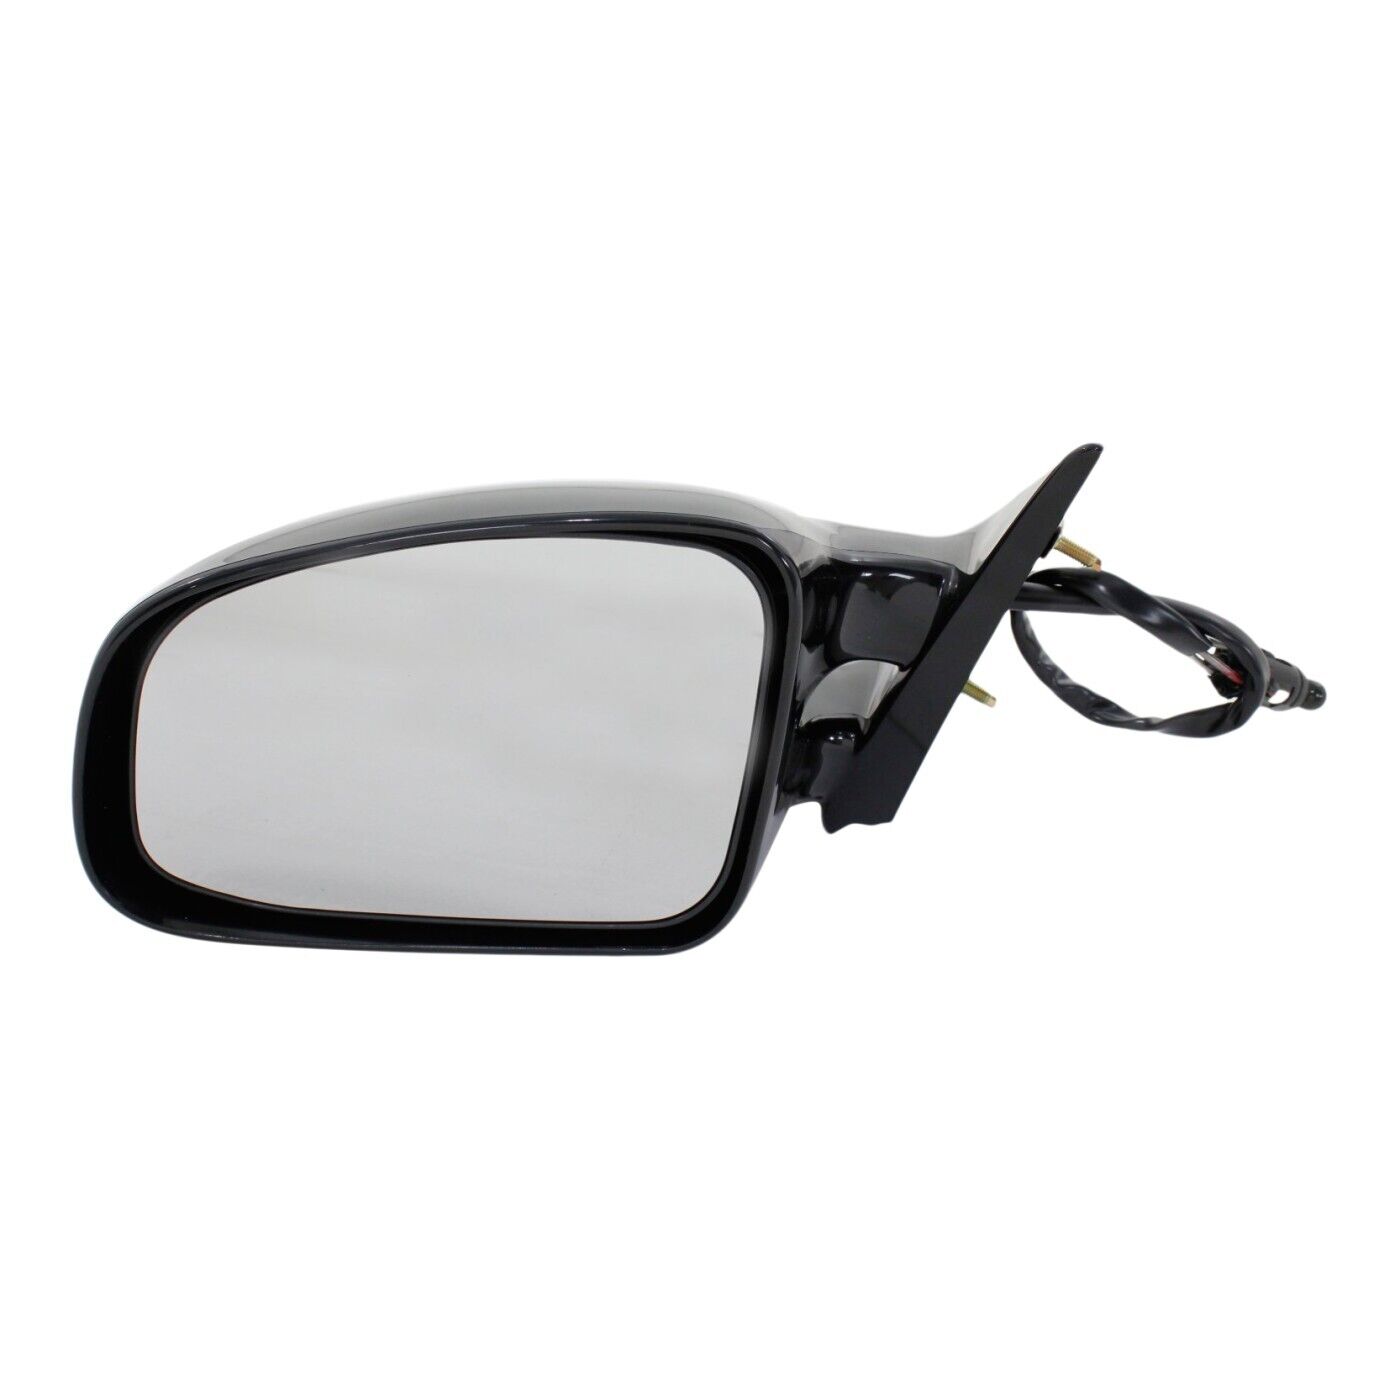 Manual Remote Mirror For 1999-2001 Pontiac Grand Am Driver Side Paintable